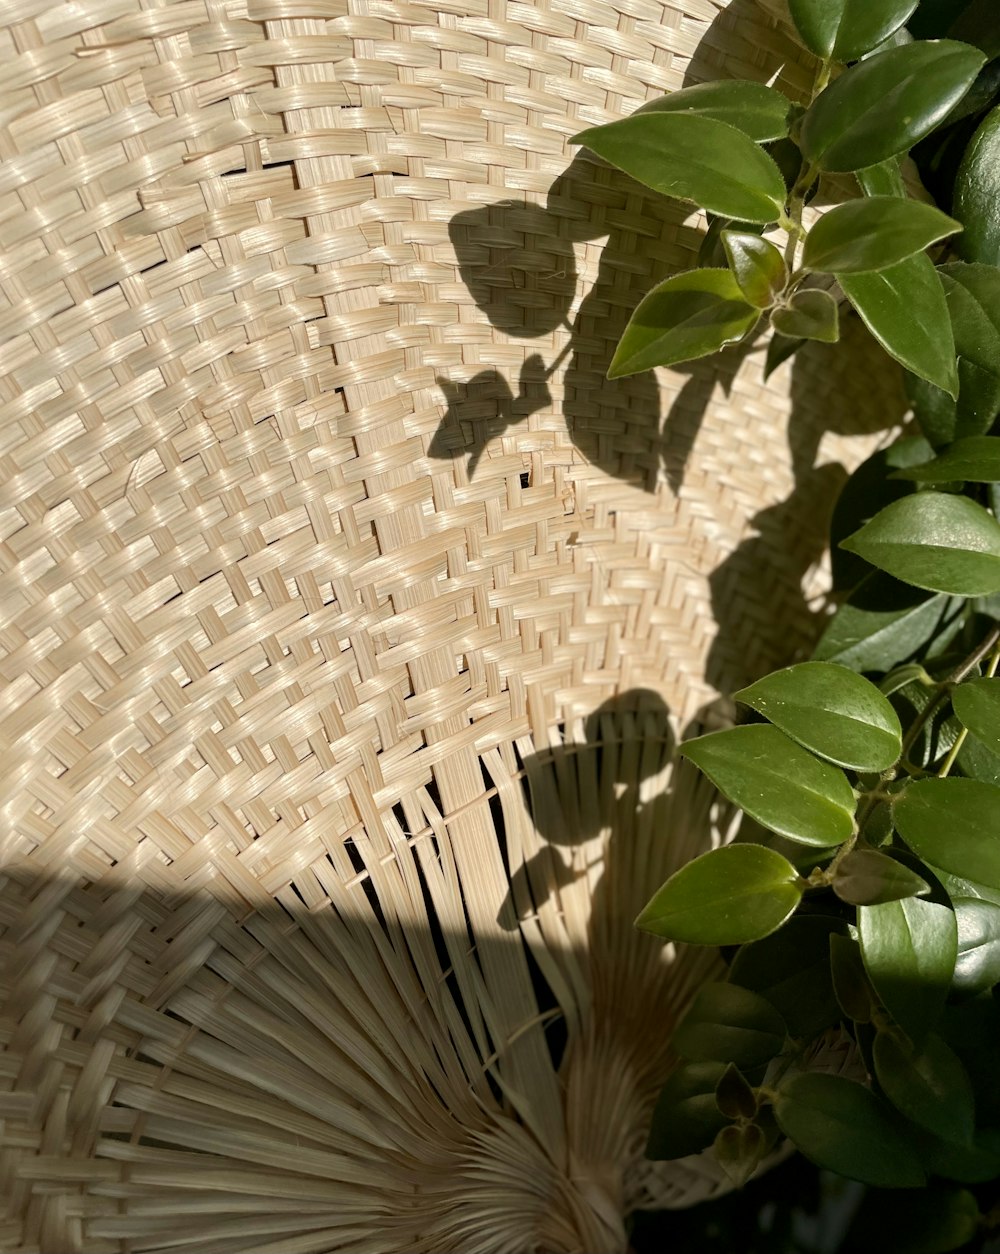 a close up of a straw hat on a tree